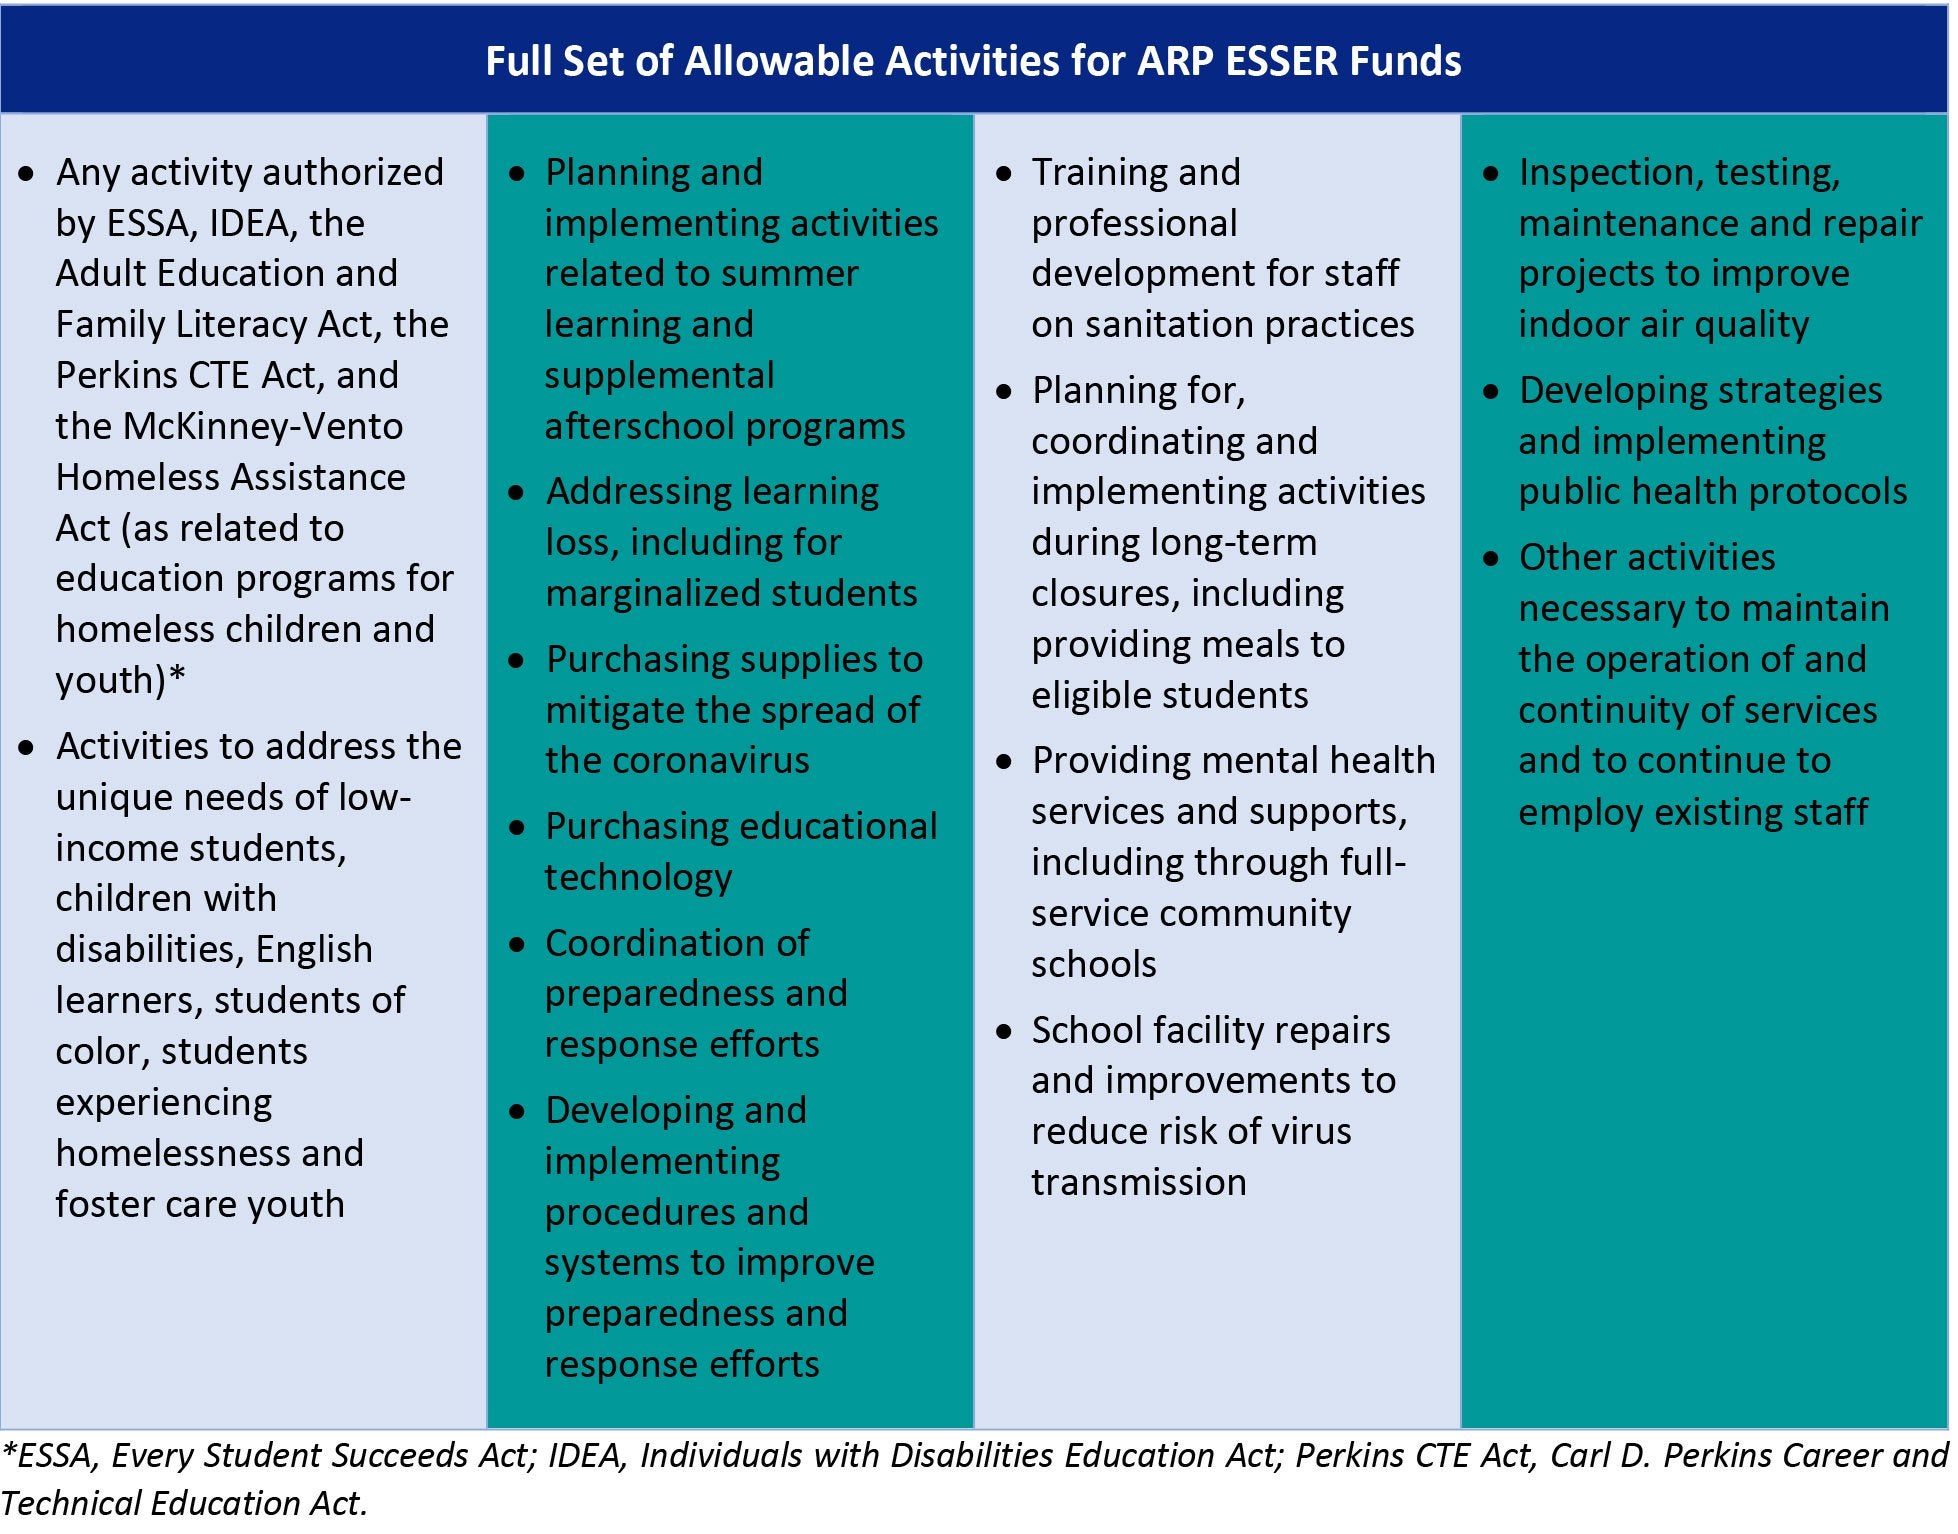 Full-Set-of-Allowable-Activities-for-ARP-ESSER-Funds-ch.jpg